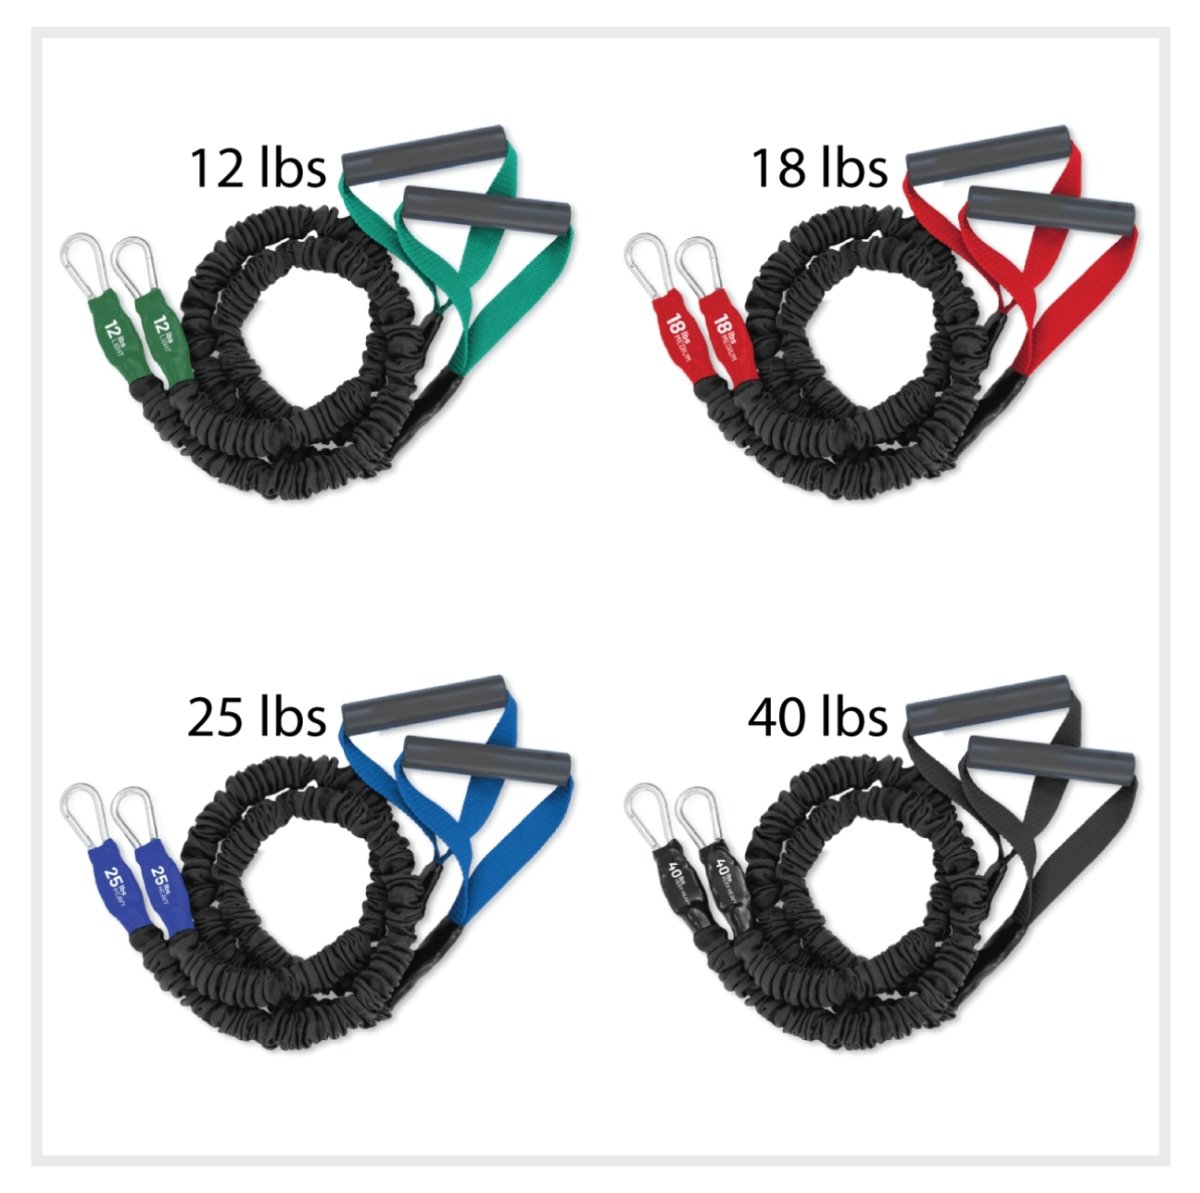 X-Over Shoulder and Arm Resistance Bands- 4 Pack (12lb/18lb/25lb/40lb) - FitCord Resistance Bands American made resistance tubes great for upper body, shoulder arm and back workouts. Compare to crossover symmetry cheaper than competitors and high quality safe exercise gear